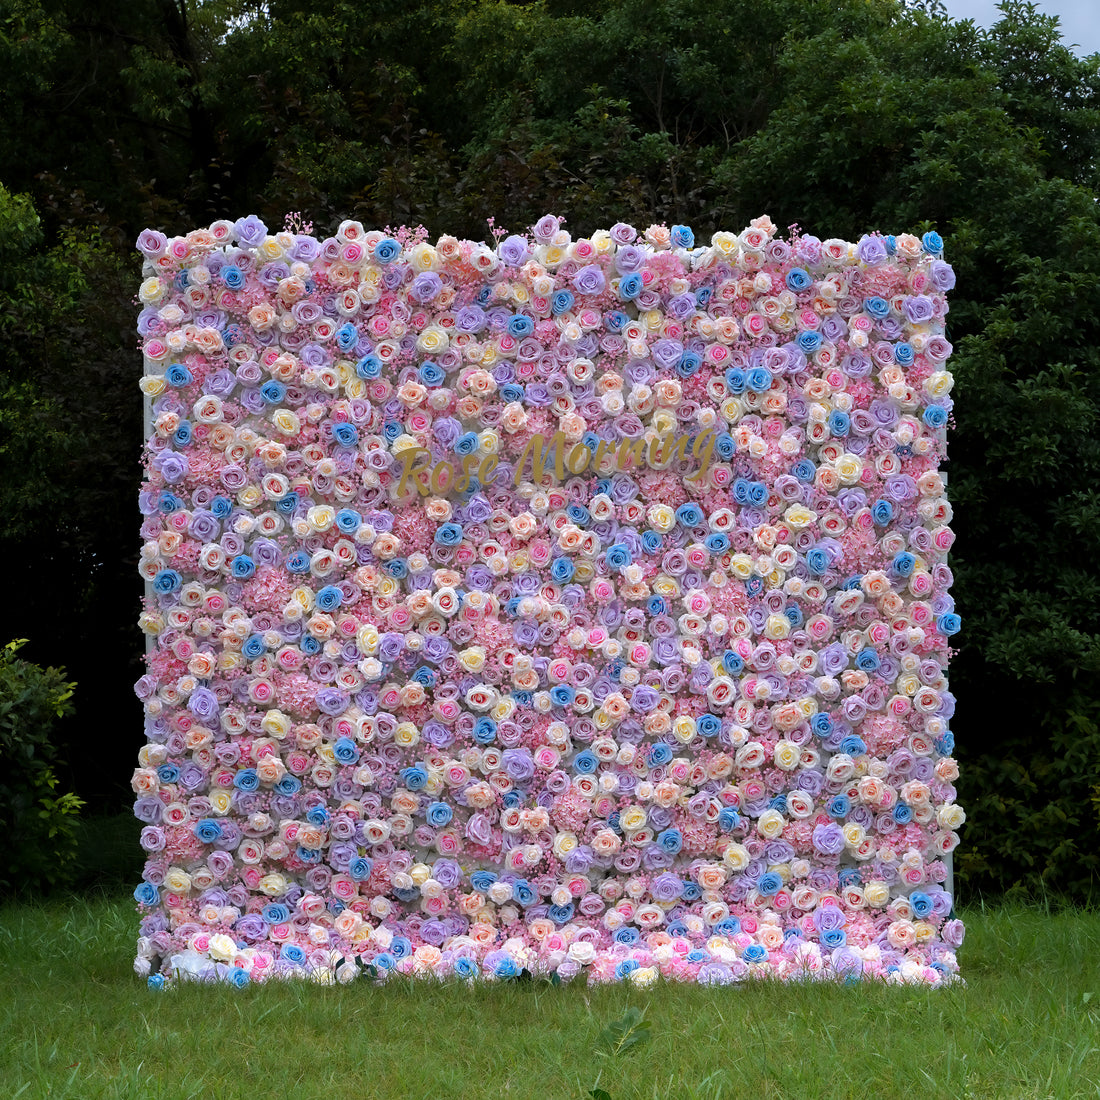 Elise:3D Fabric Artificial Flower Wall Rolling Up Curtain Flower Wall 8ft*8ft -R055 Rose Morning